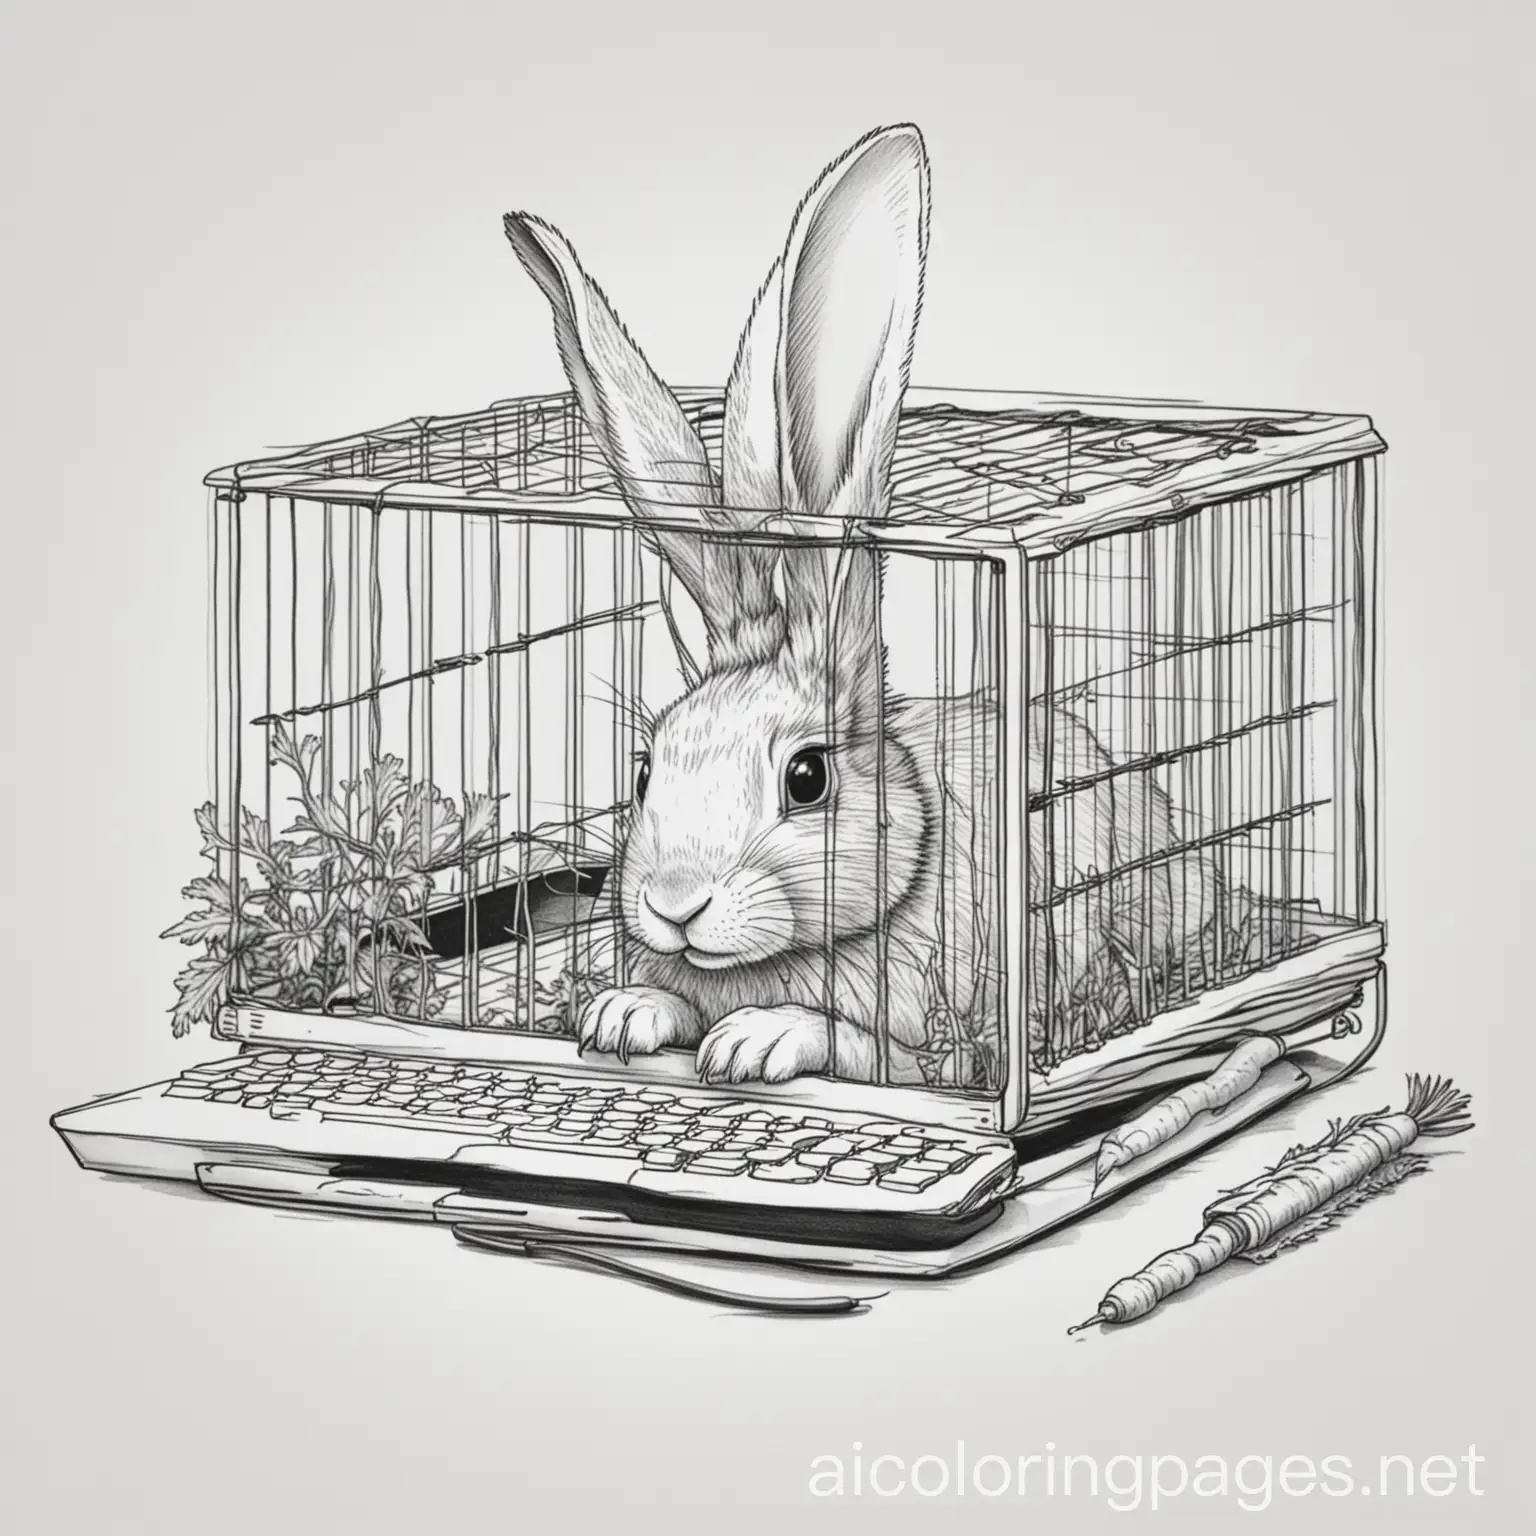 A rabbit in a cage eating carrot near a computer, Coloring Page, black and white, line art, white background, Simplicity, Ample White Space. The background of the coloring page is plain white to make it easy for young children to color within the lines. The outlines of all the subjects are easy to distinguish, making it simple for kids to color without too much difficulty